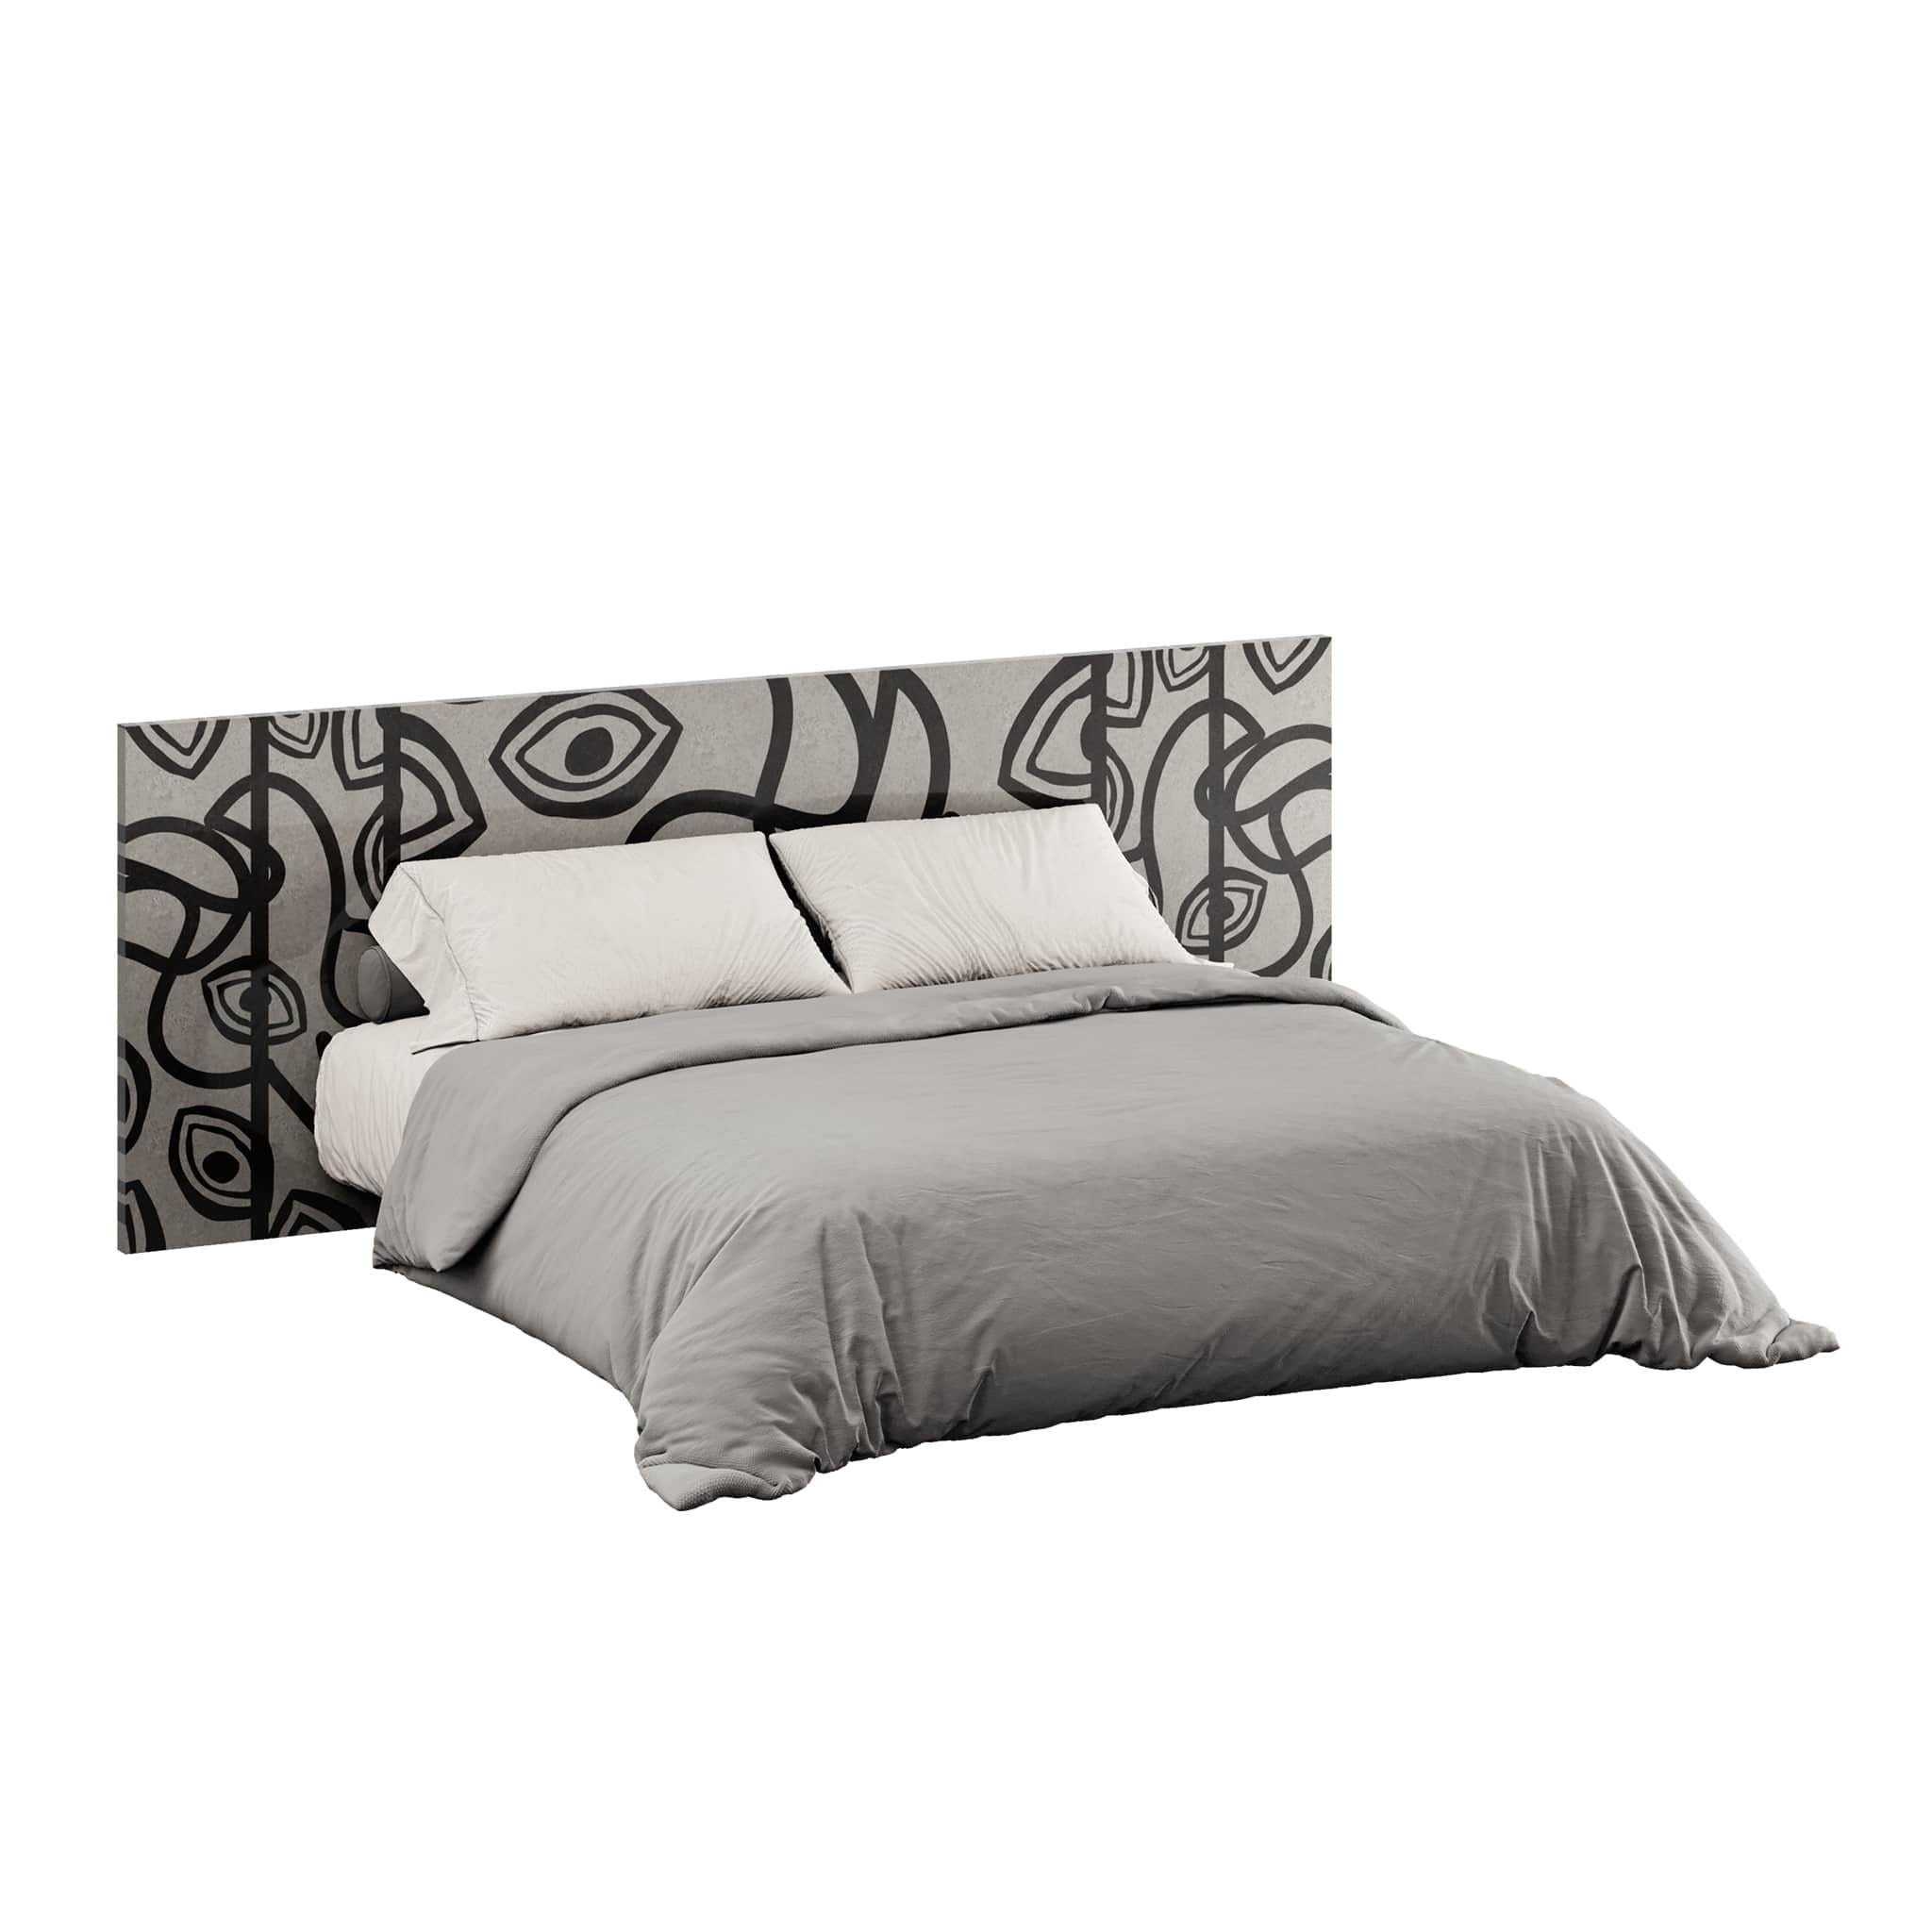 Mid-Century Modern 21th Century Modern Bed Contemporary Headboard in Balck & White Wood Marquetry  For Sale